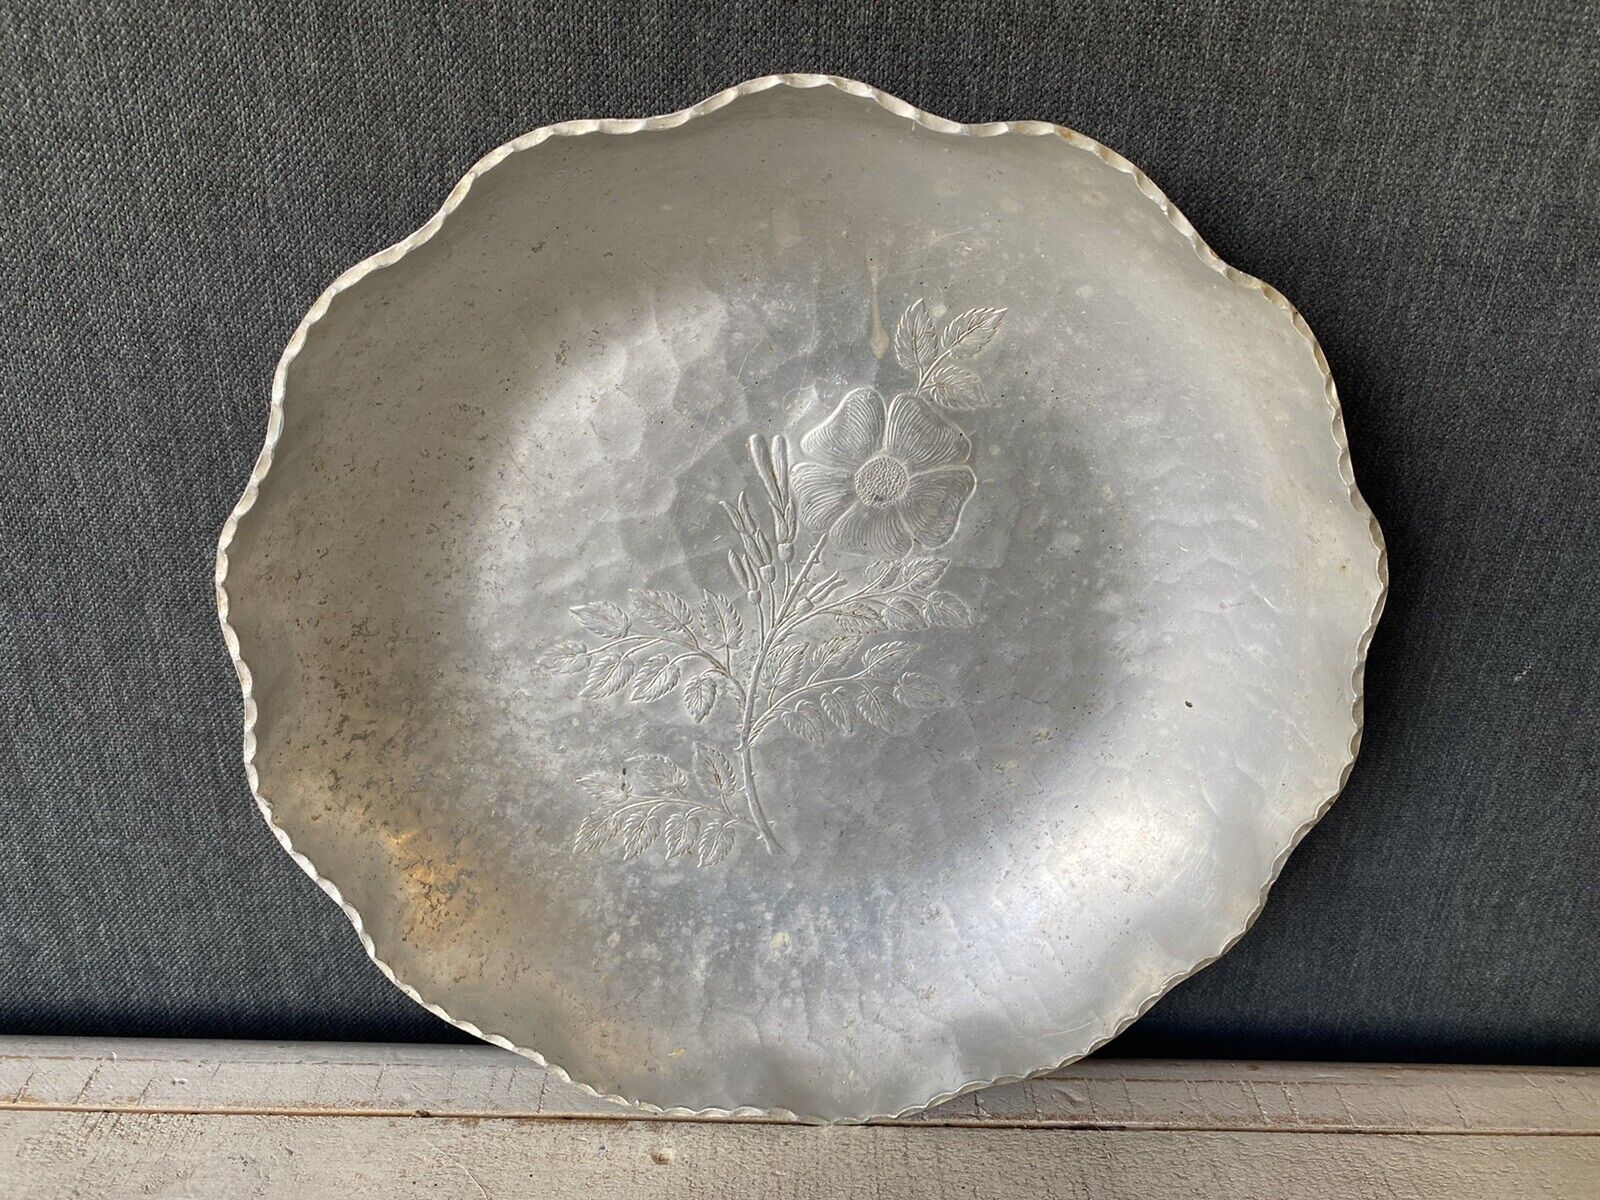 Wilson Spec hammered metal bowl with scalloped edge